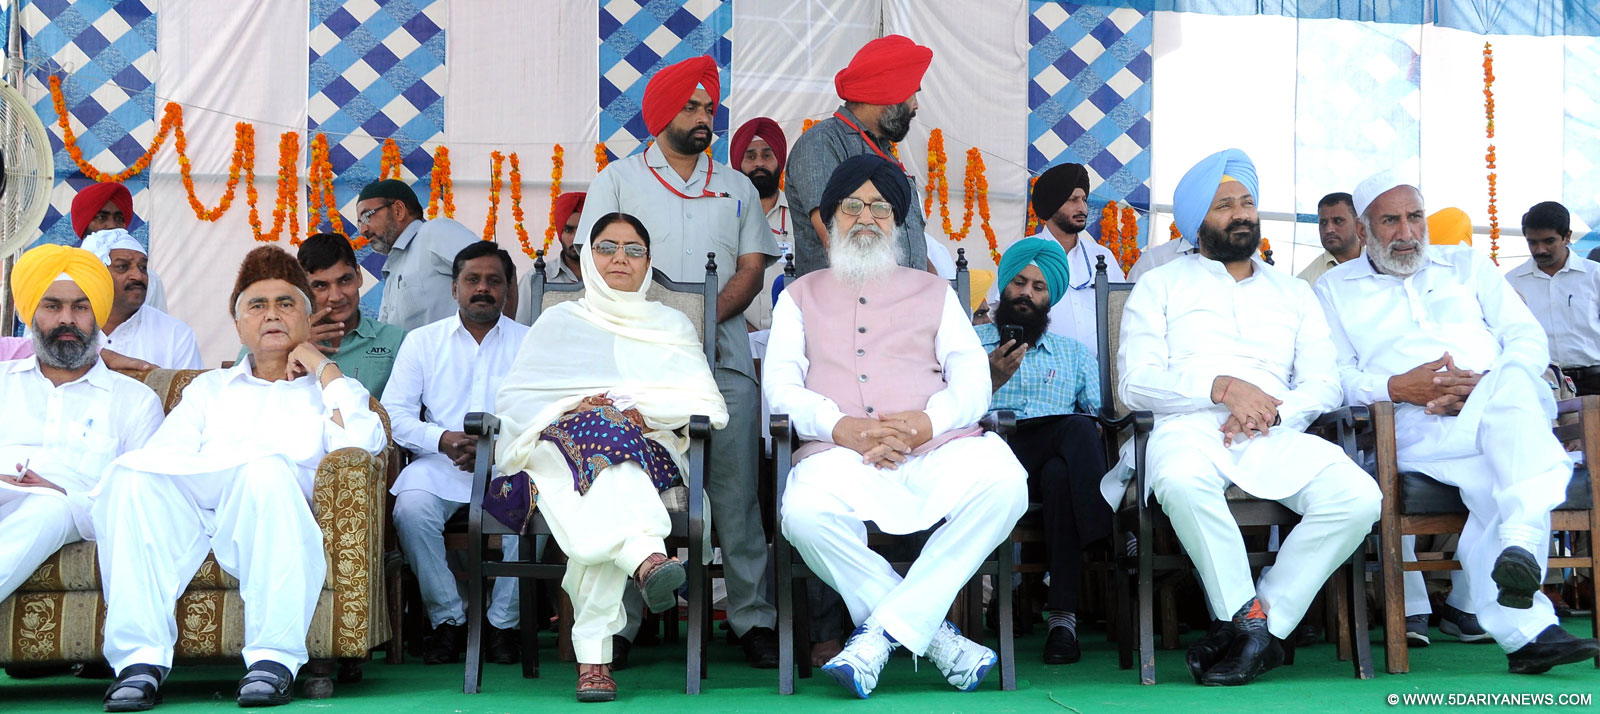 People Sans Administrative Experience Could Be Potently Dangerous For The Welfare Of The State- Parkash Singh Badal